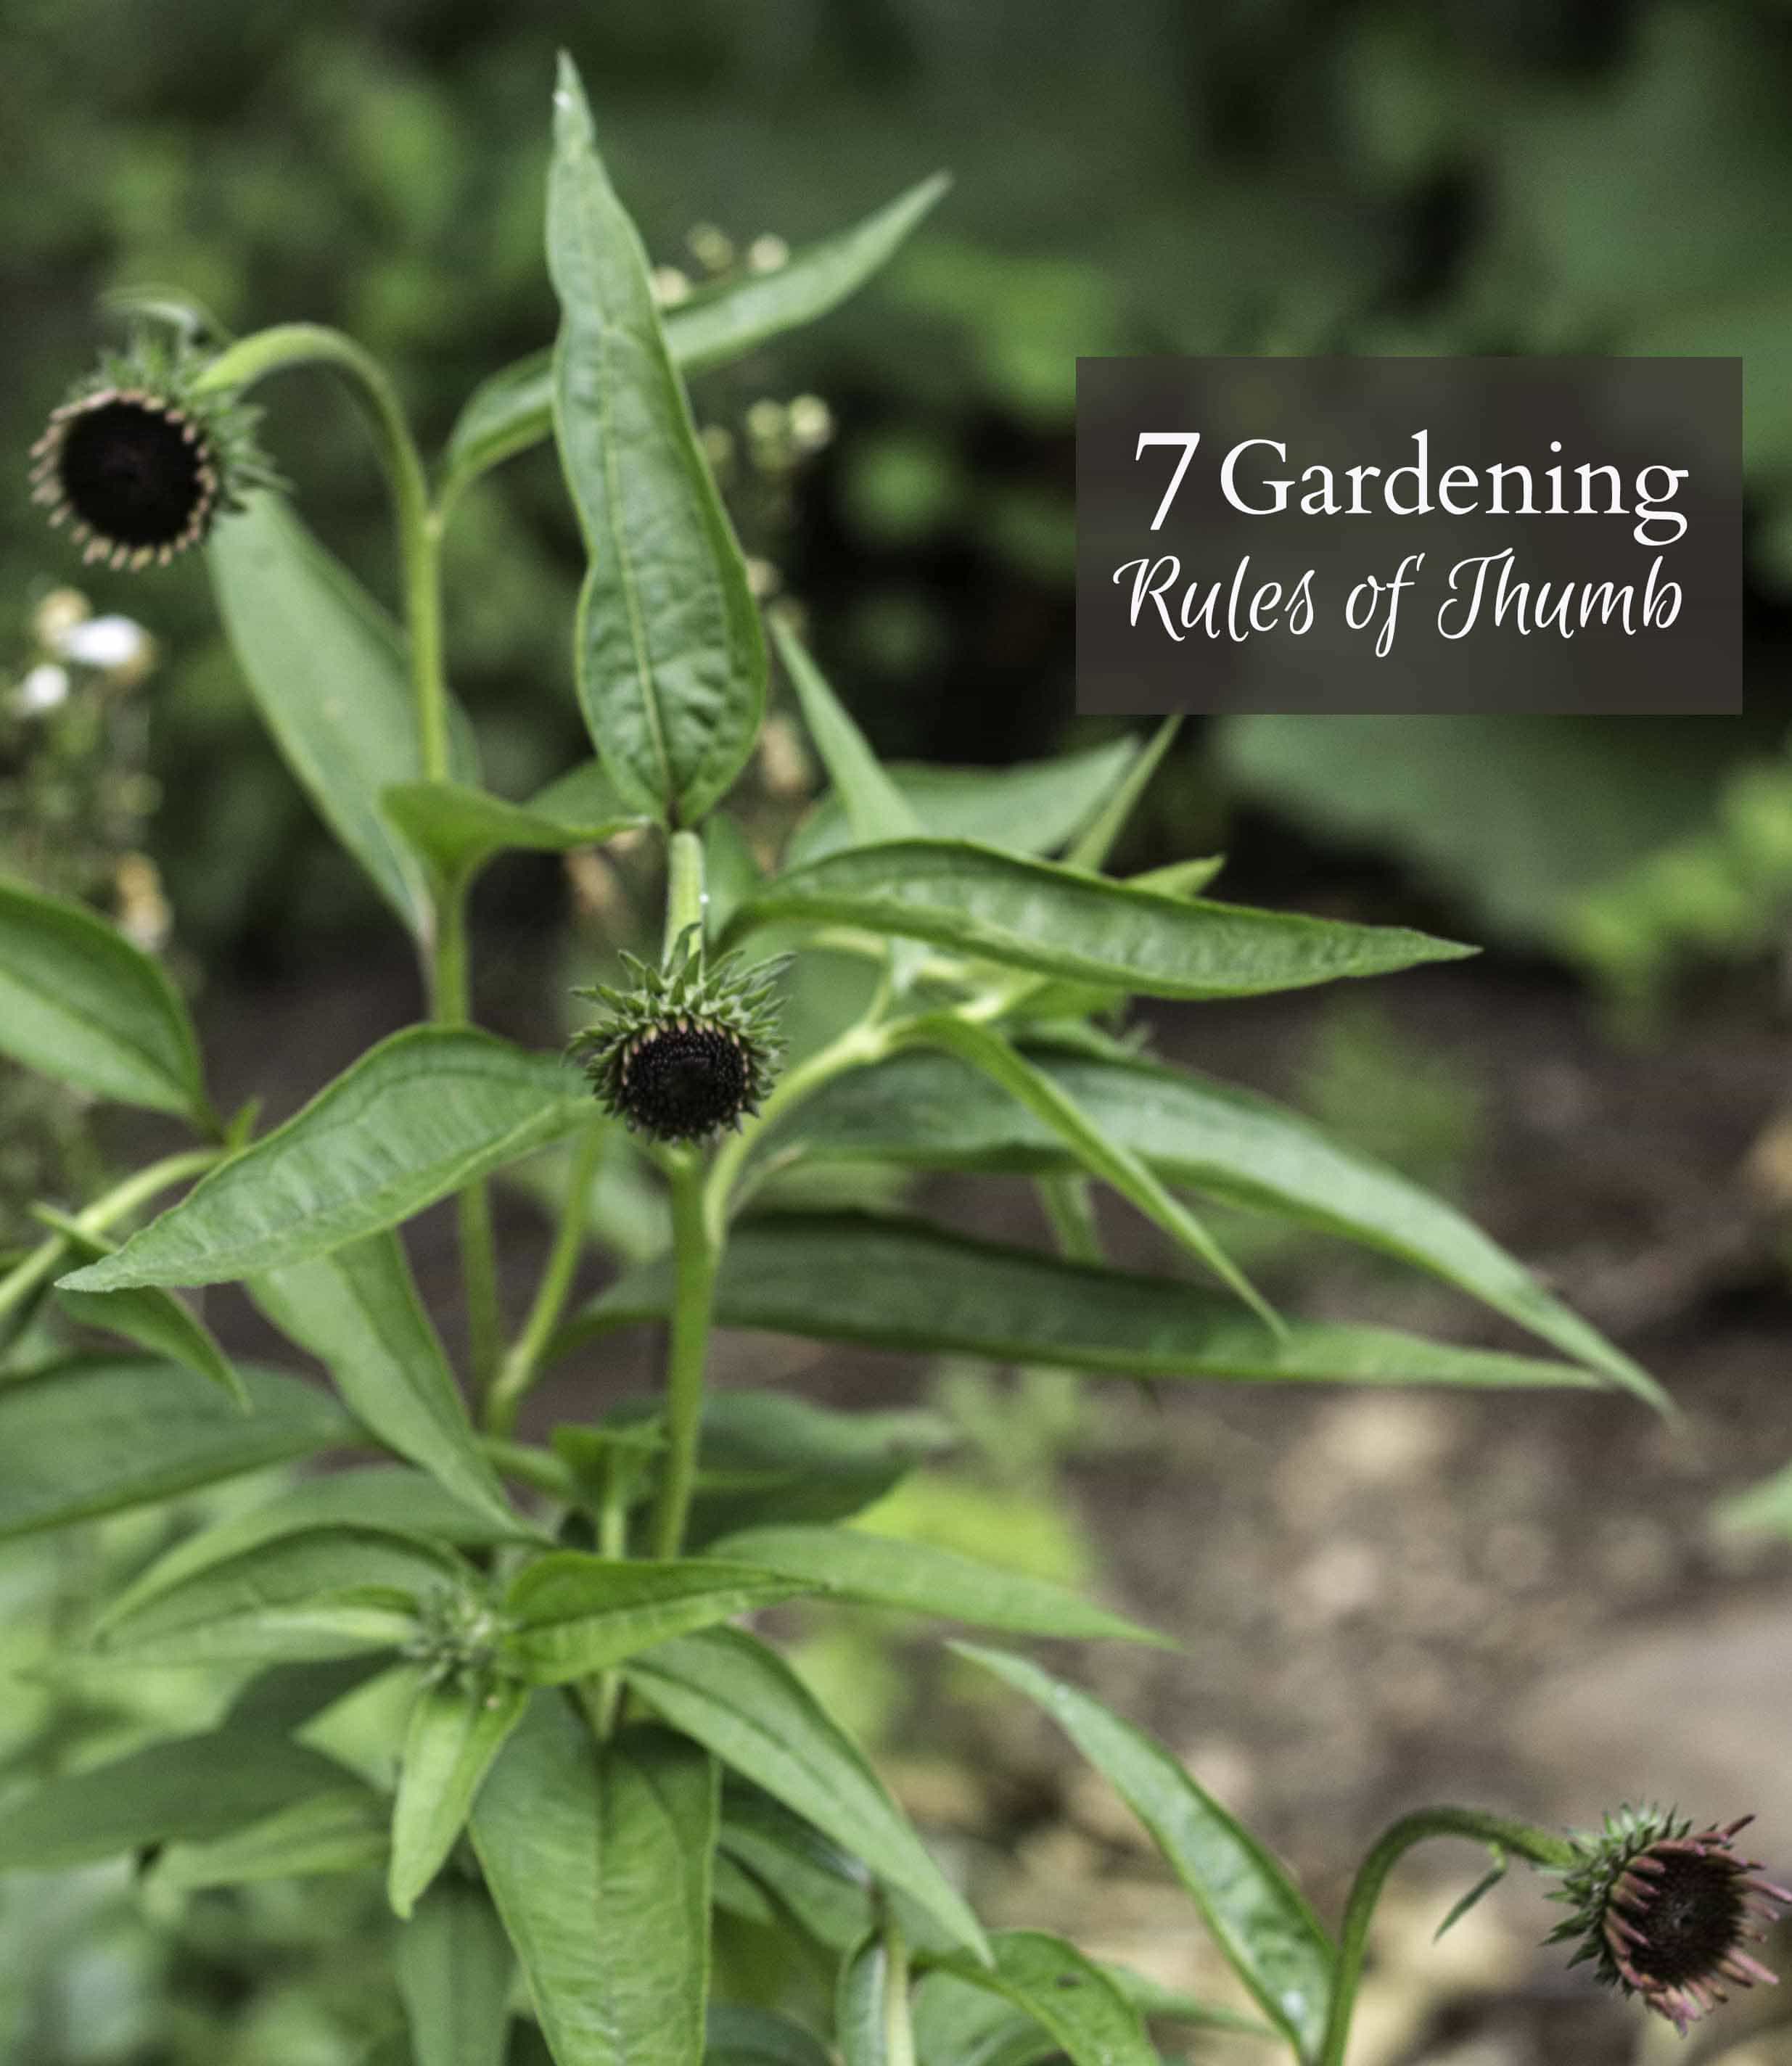 Learn some great tips about gardening rules of thumb, gathered over many years of backyard gardening experience to help you have success in your garden.